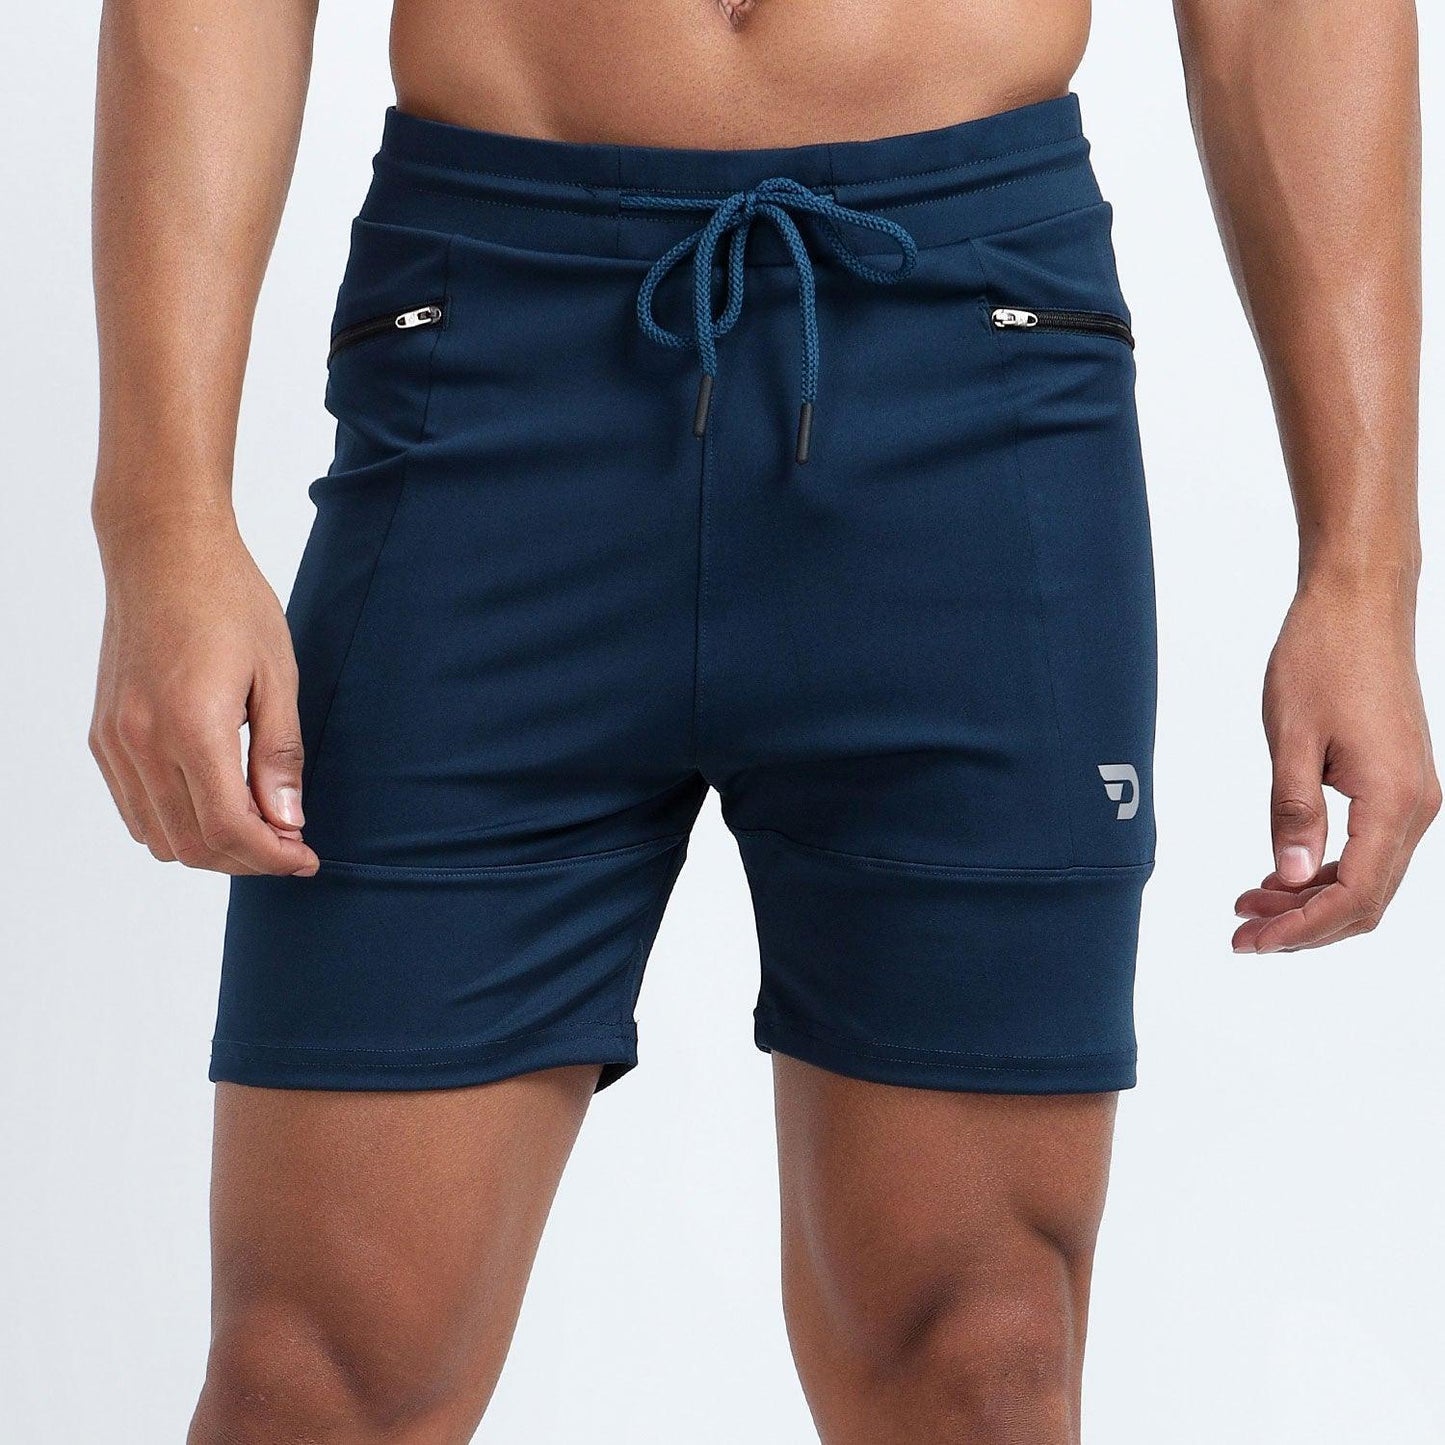 Denmonk's fashionable Power Shorts regal blue shorts for men will boost your level of gym fitness.f